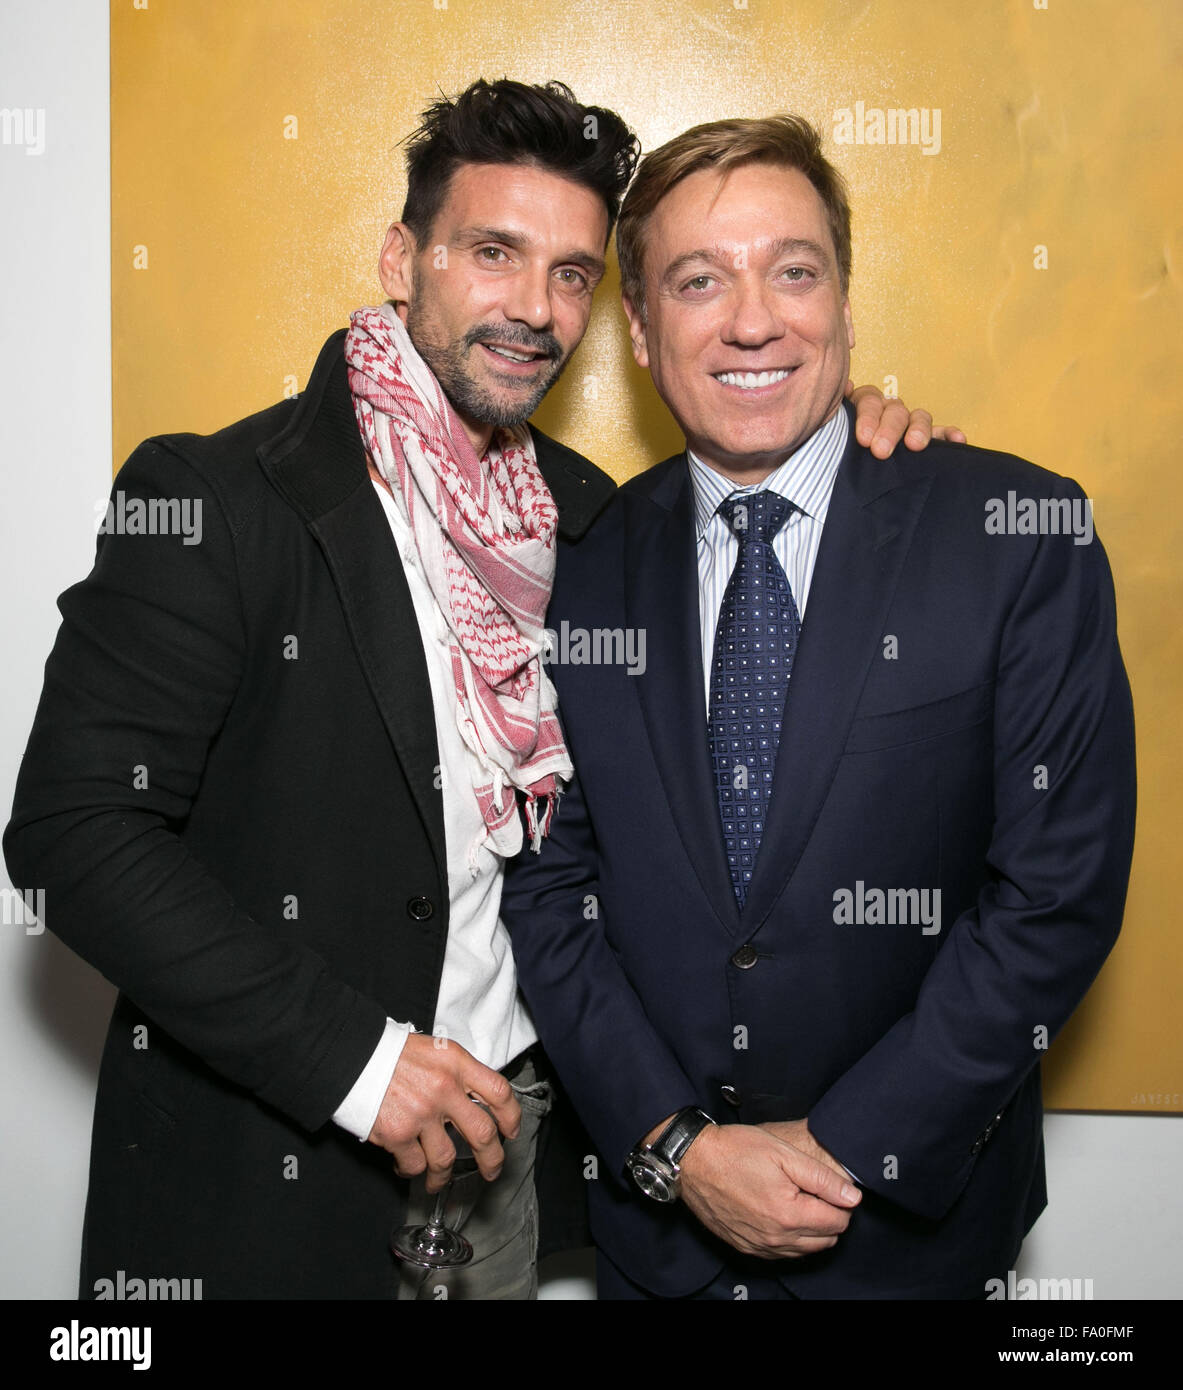 Celebrities attend Steve Janssen's Brain Change one night solo exhibition at De Re Gallery.  Featuring: Frank Grillo, Kevin Huvane Where: Los Angeles, California, United States When: 17 Nov 2015 Stock Photo